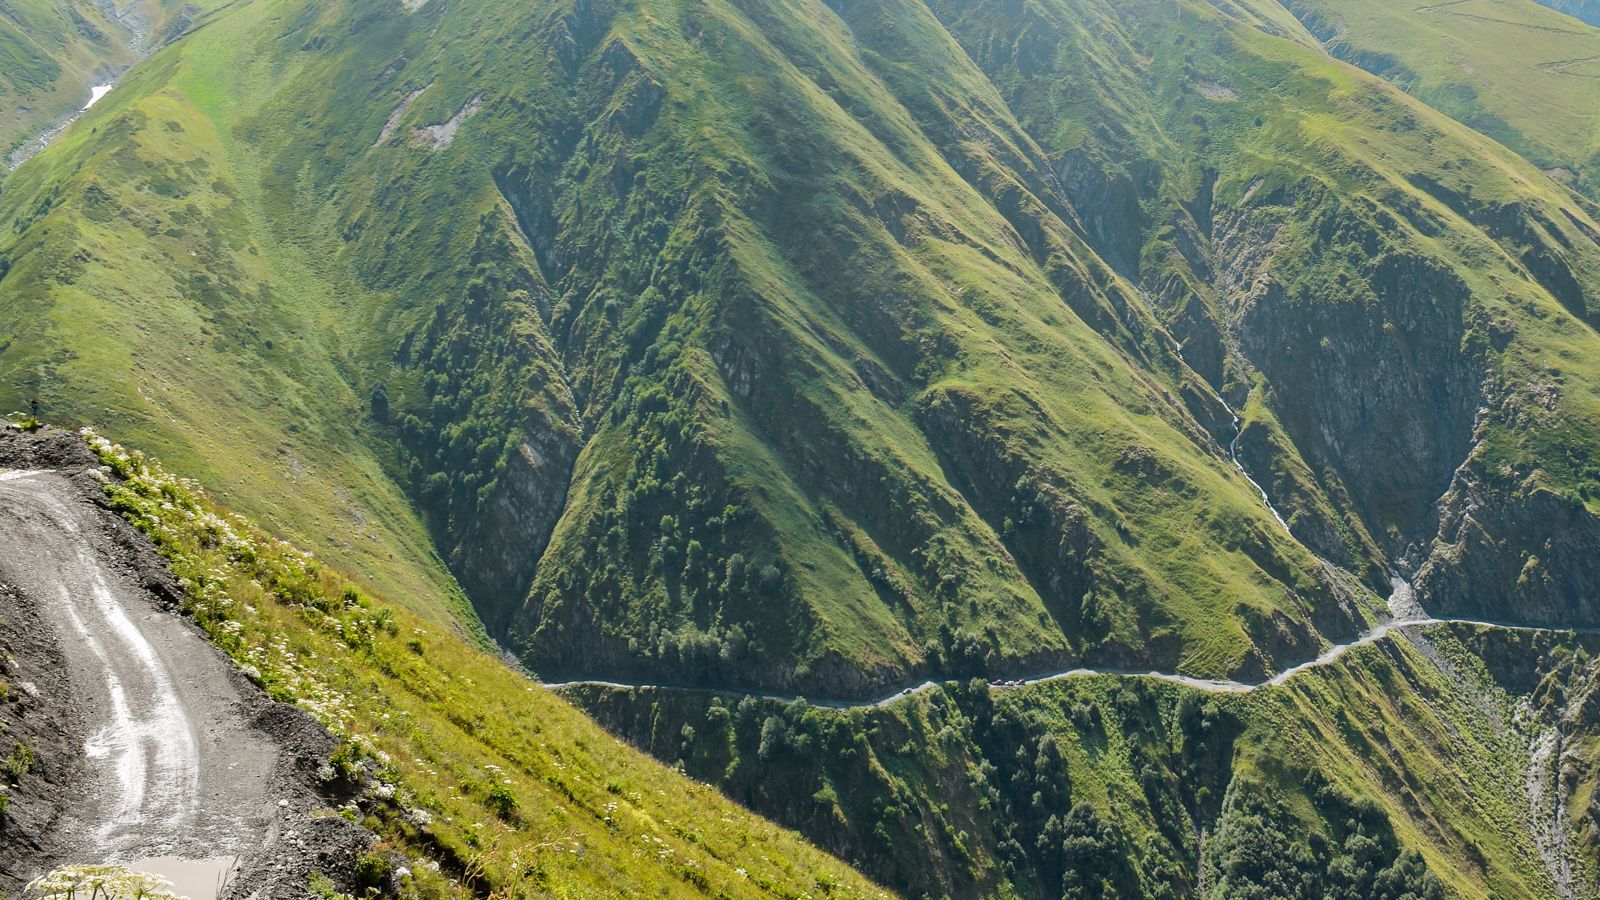 <strong>Into the wild:</strong> A narrow gravel road is the only access Georgia's remote Tusheti region has with the outside world. Its isolation has made it a unique destination for adventurous hikers on the frontier of Europe.